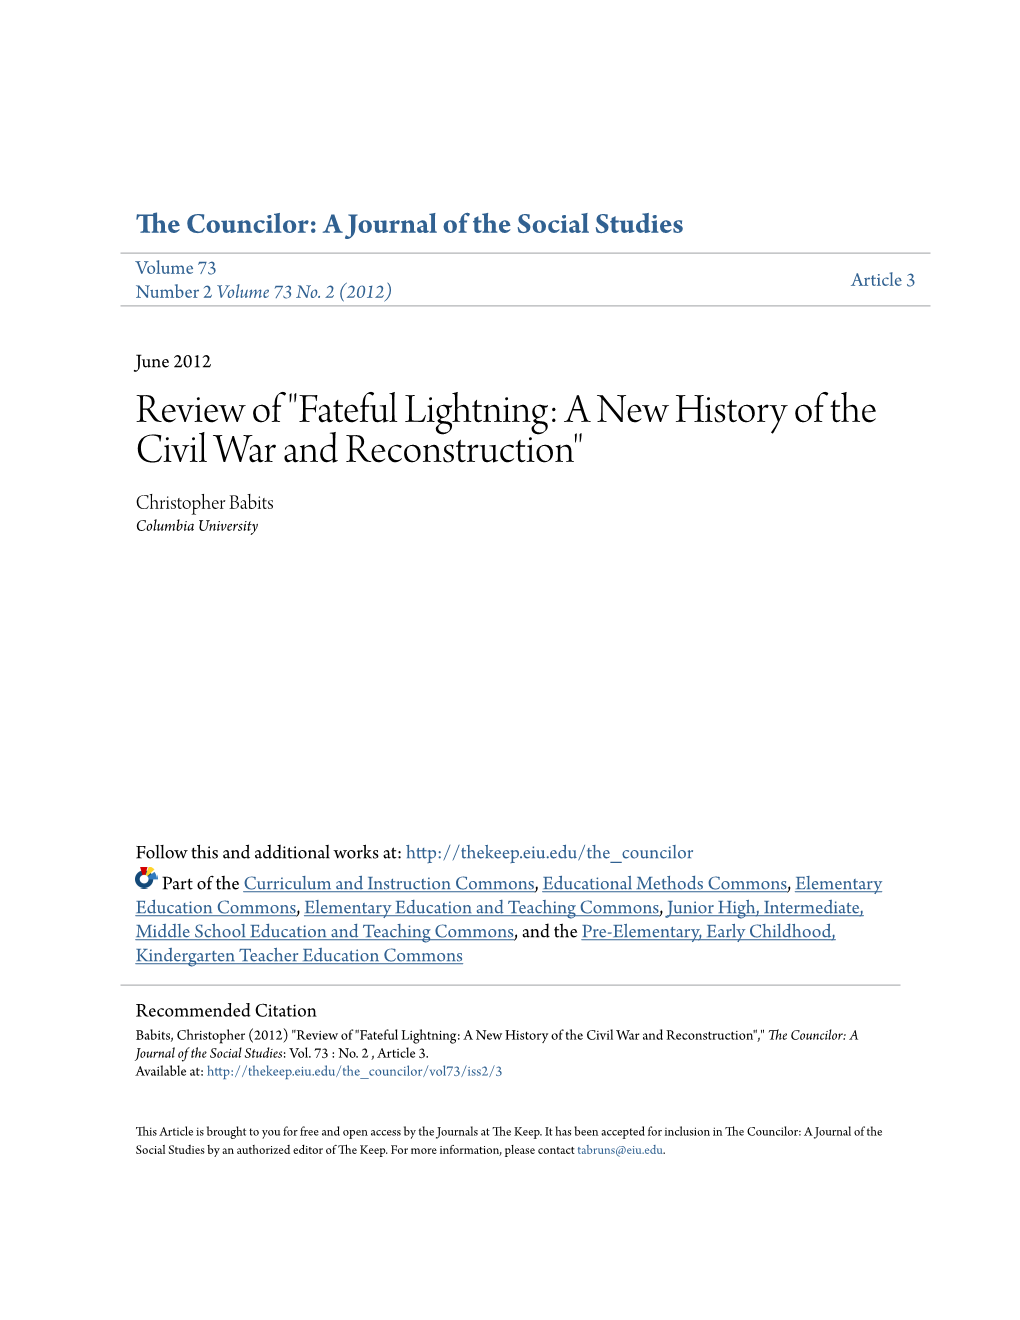 Fateful Lightning: a New History of the Civil War and Reconstruction" Christopher Babits Columbia University